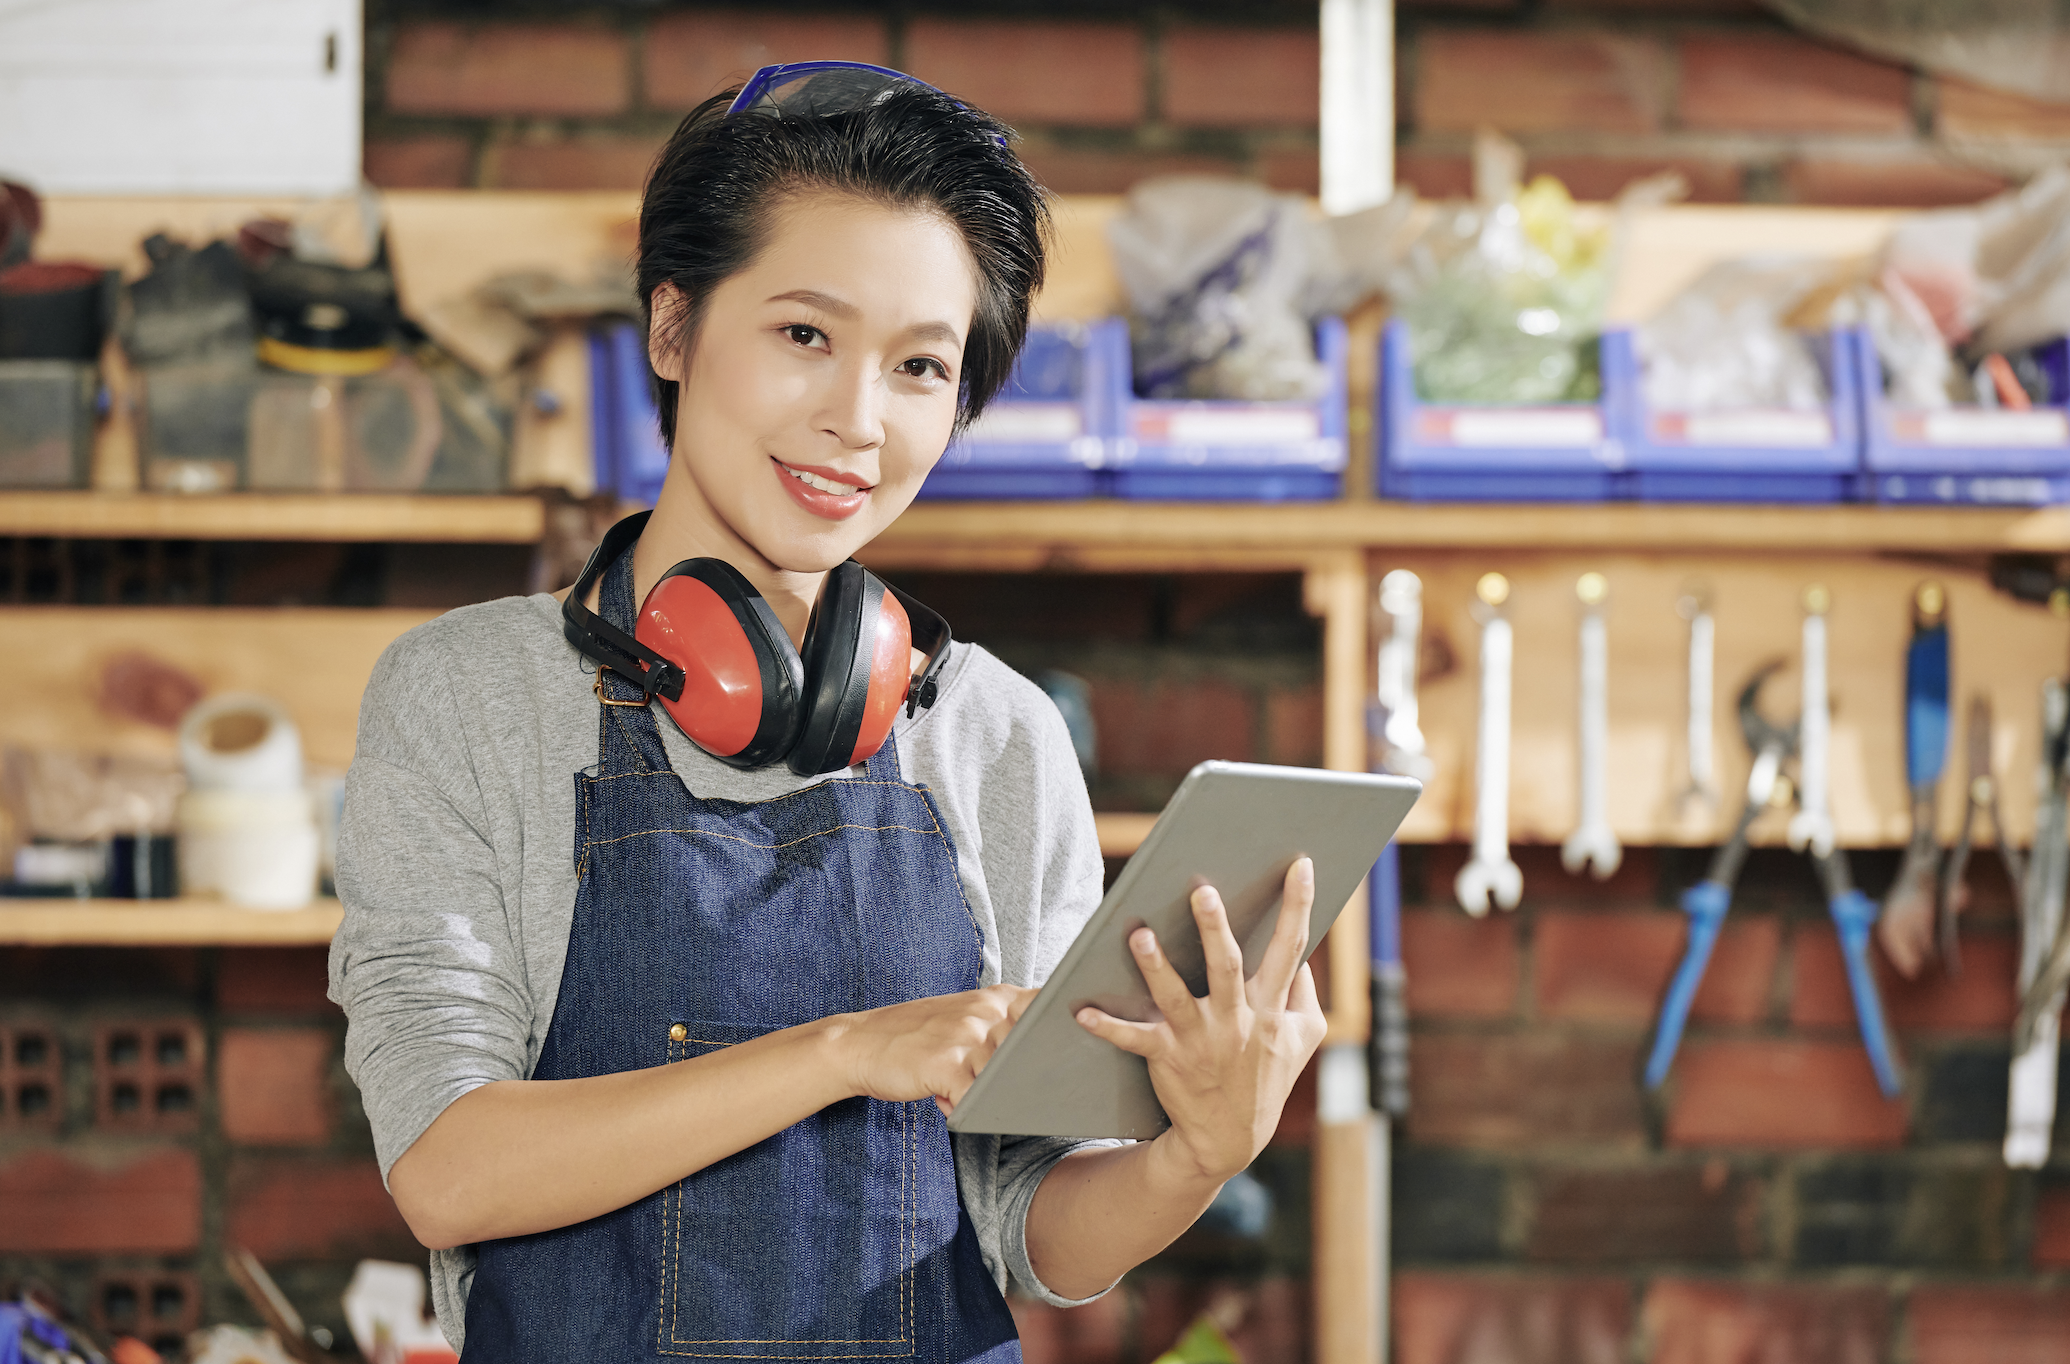 a smiling woman in overalls and headphones smiling with a tablet